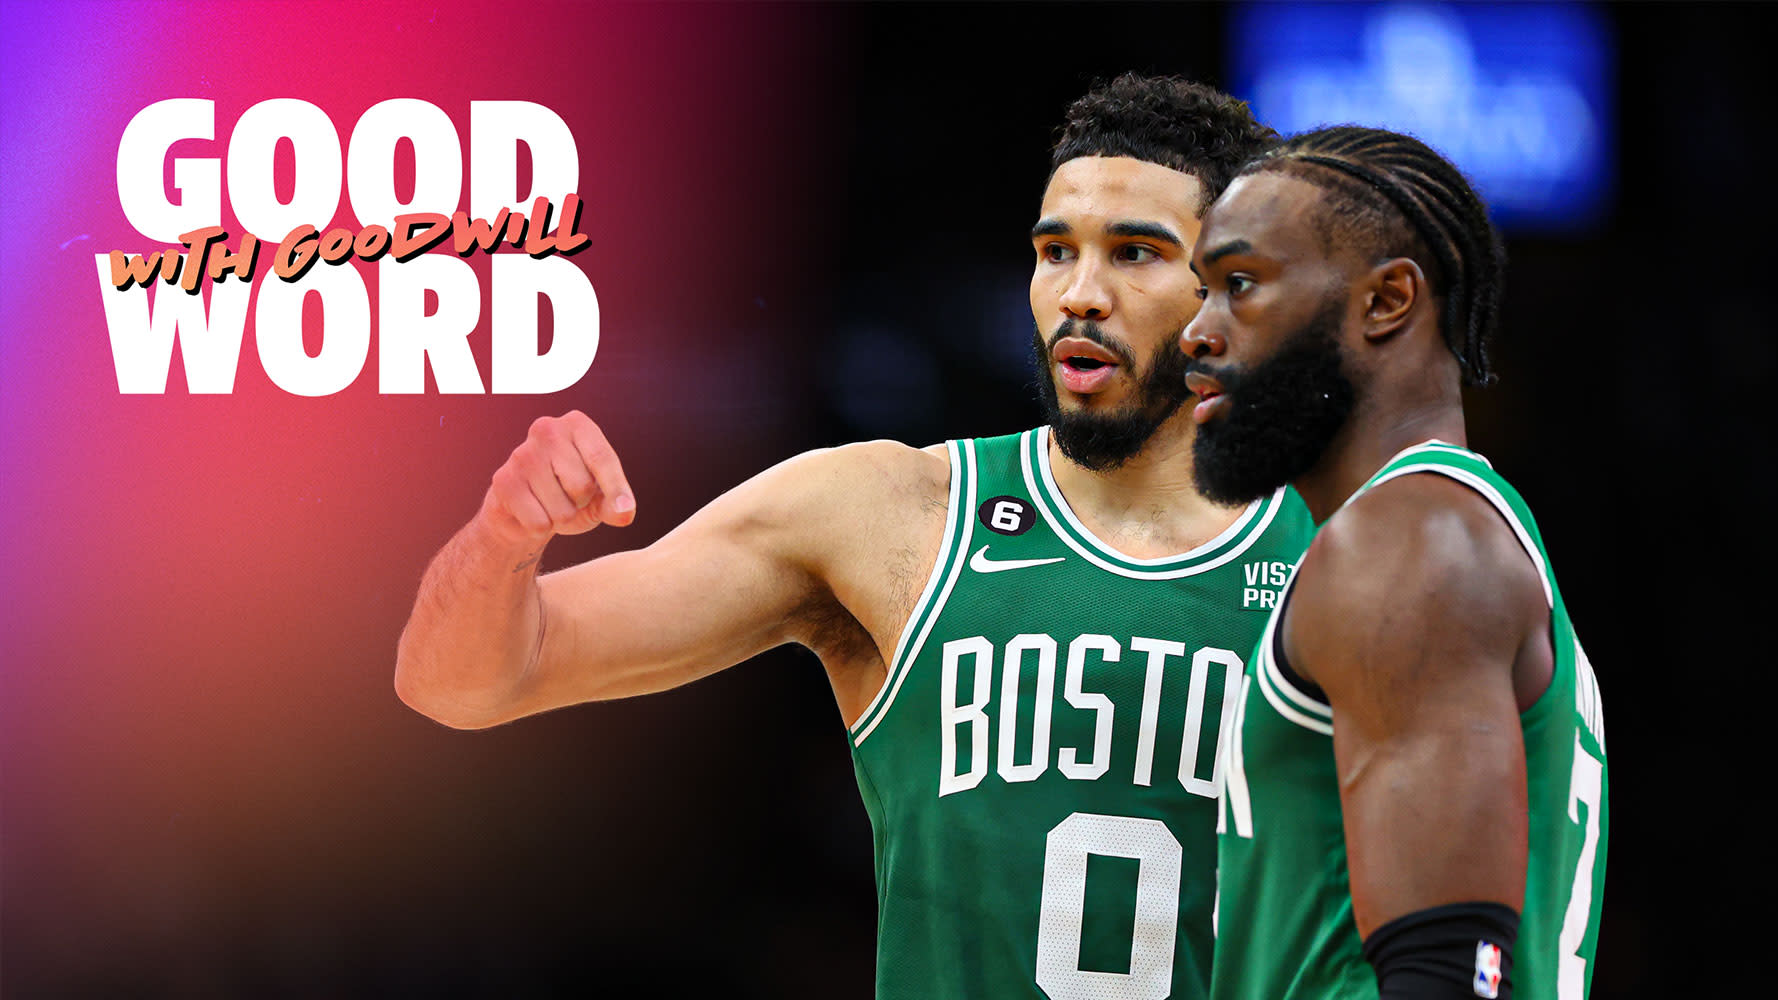 LeBron turns 39 & do the Celtics have the right offensive philosophy? | Good Word with Goodwill